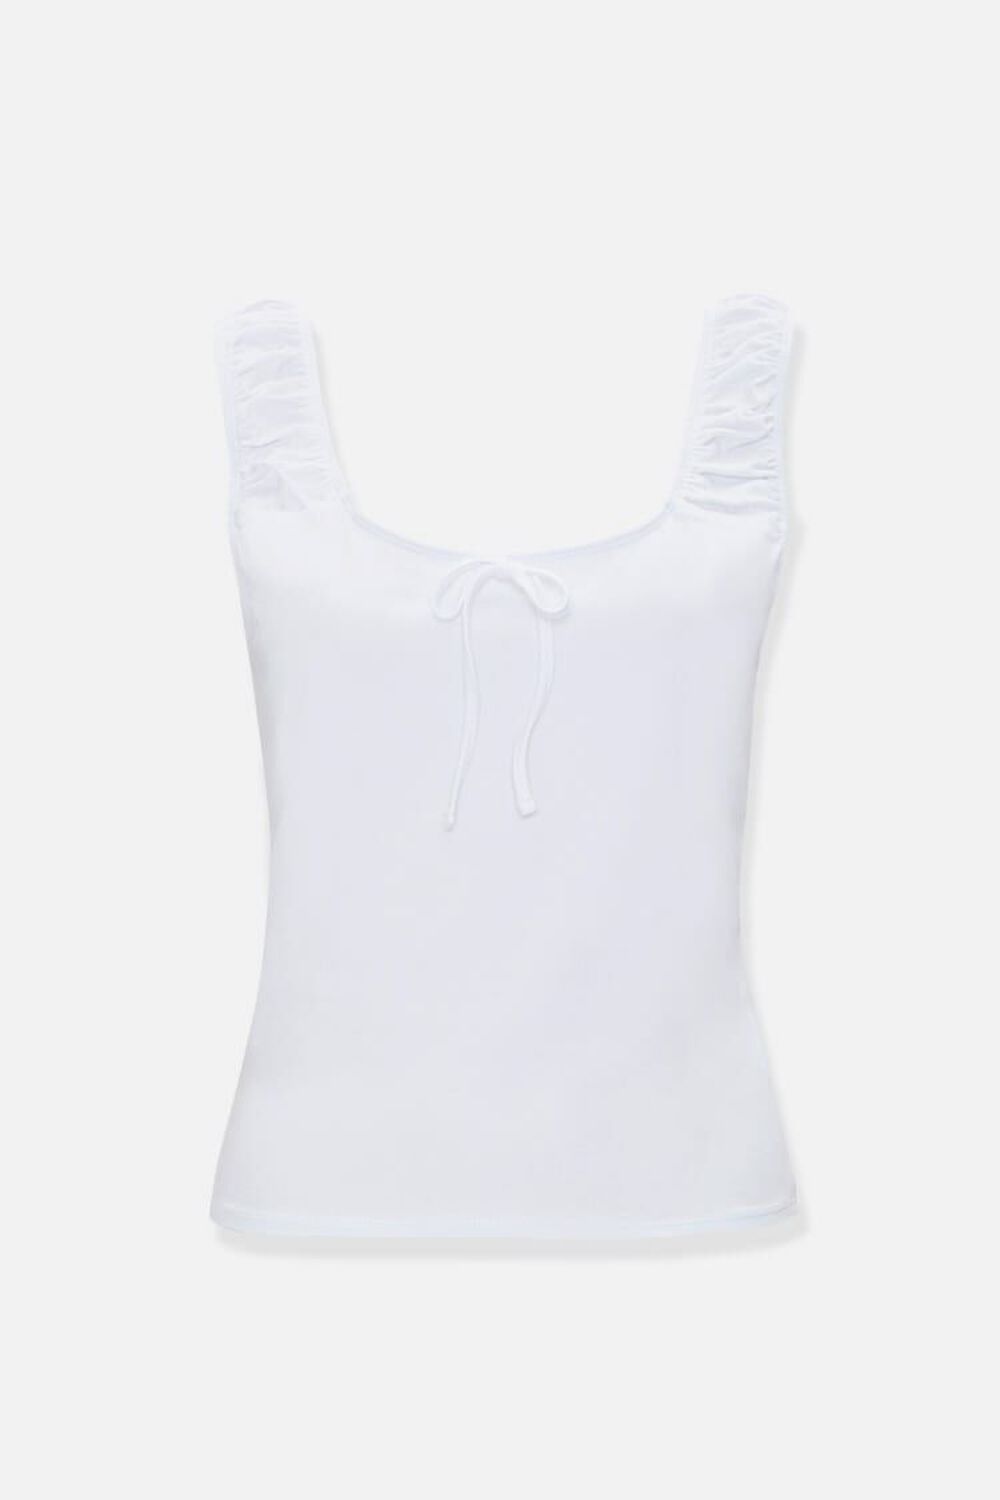 WHITE Ruched-Strap Tank Top, image 1